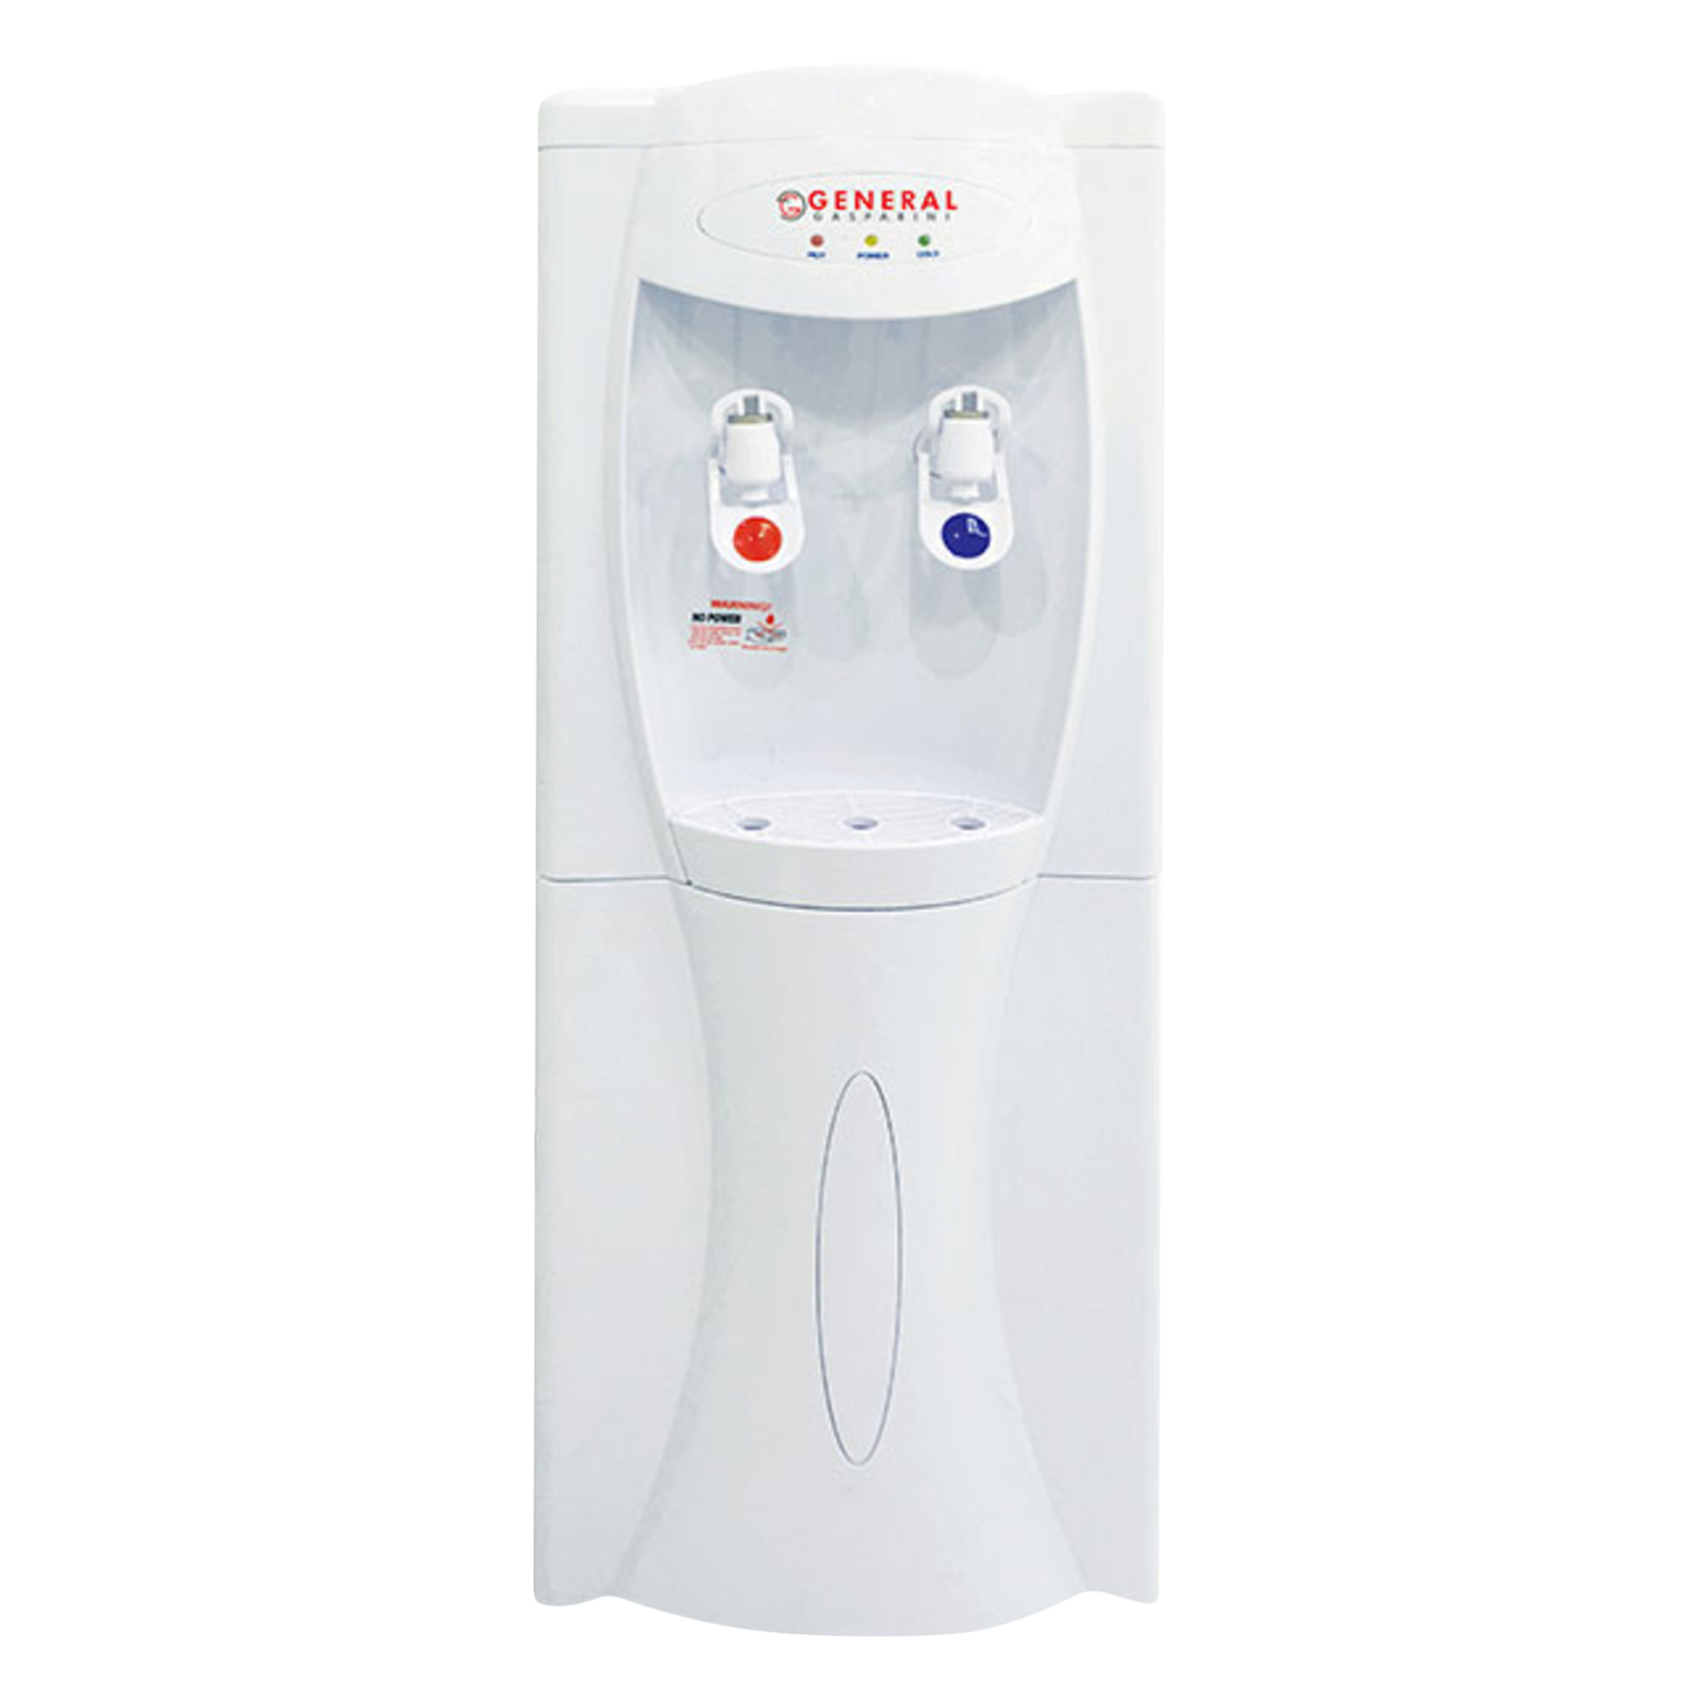 General GC50-W Corpomatic Water Dispenser With Bottom Cabinet White